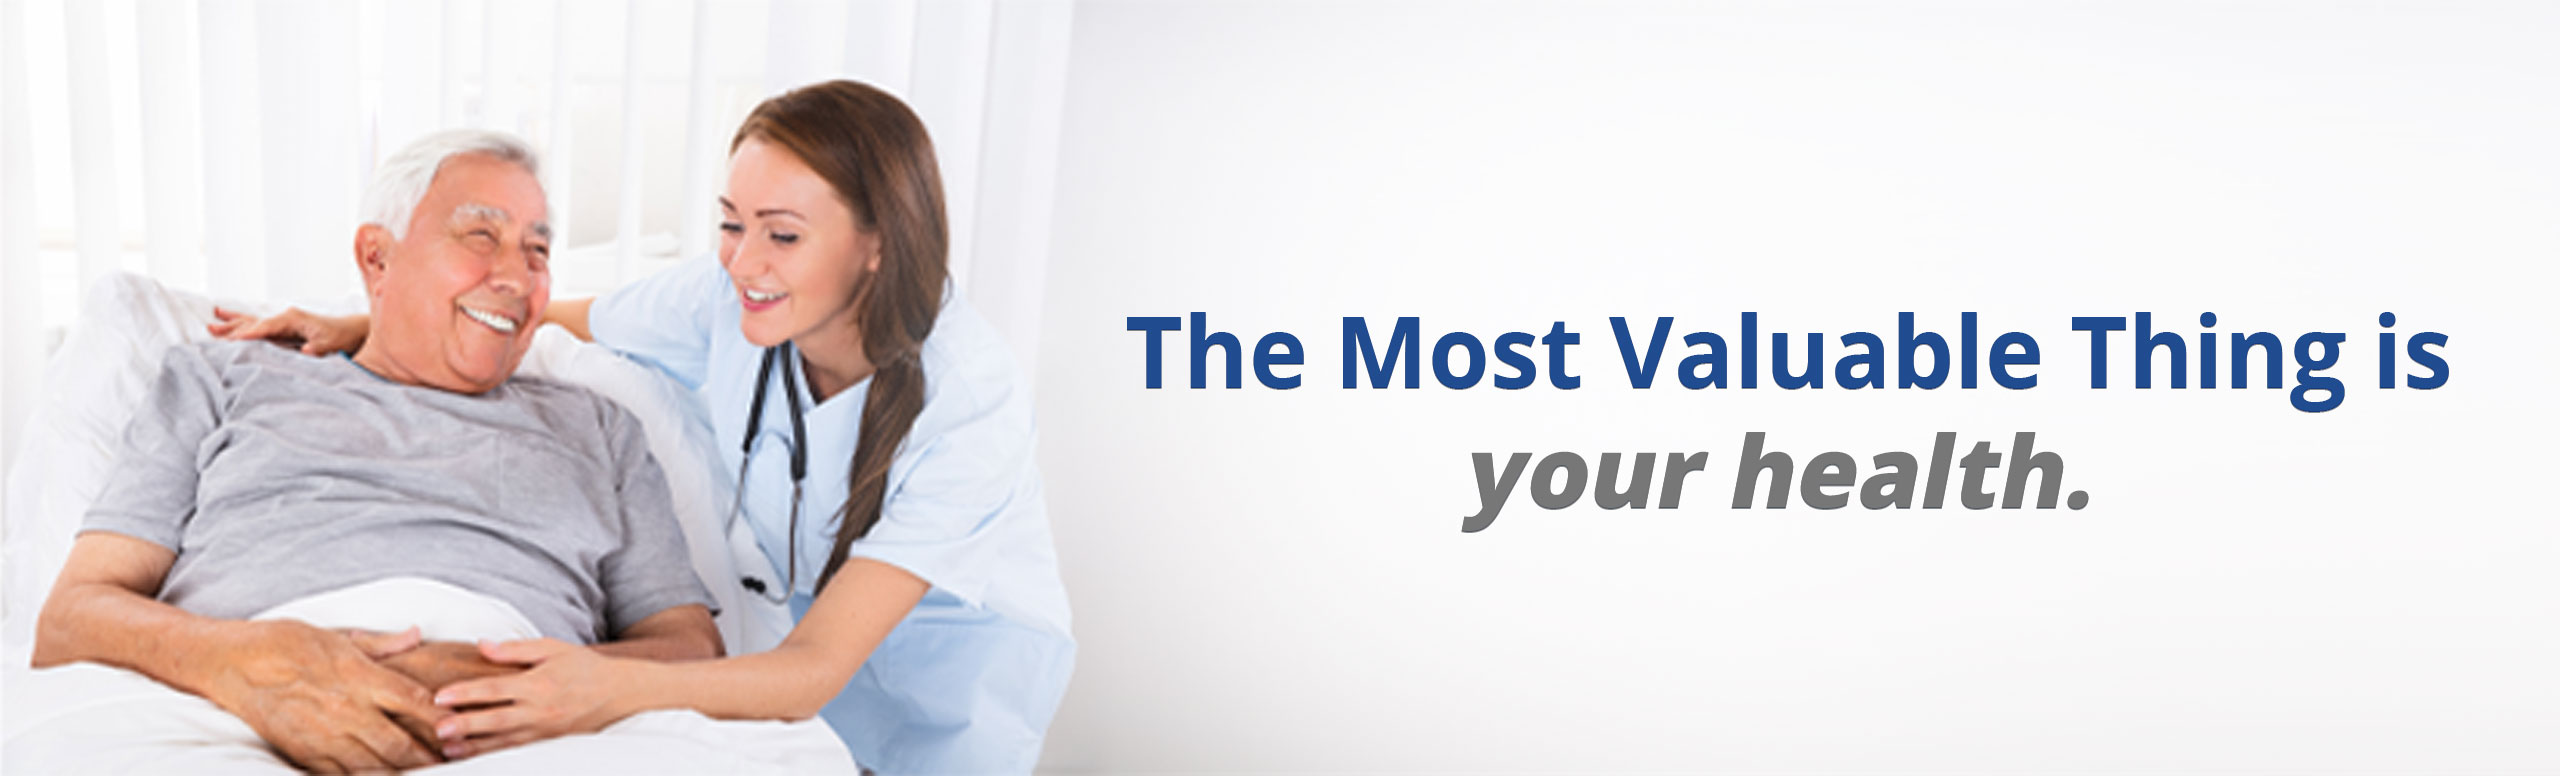 The Most Valuable thing is your health.